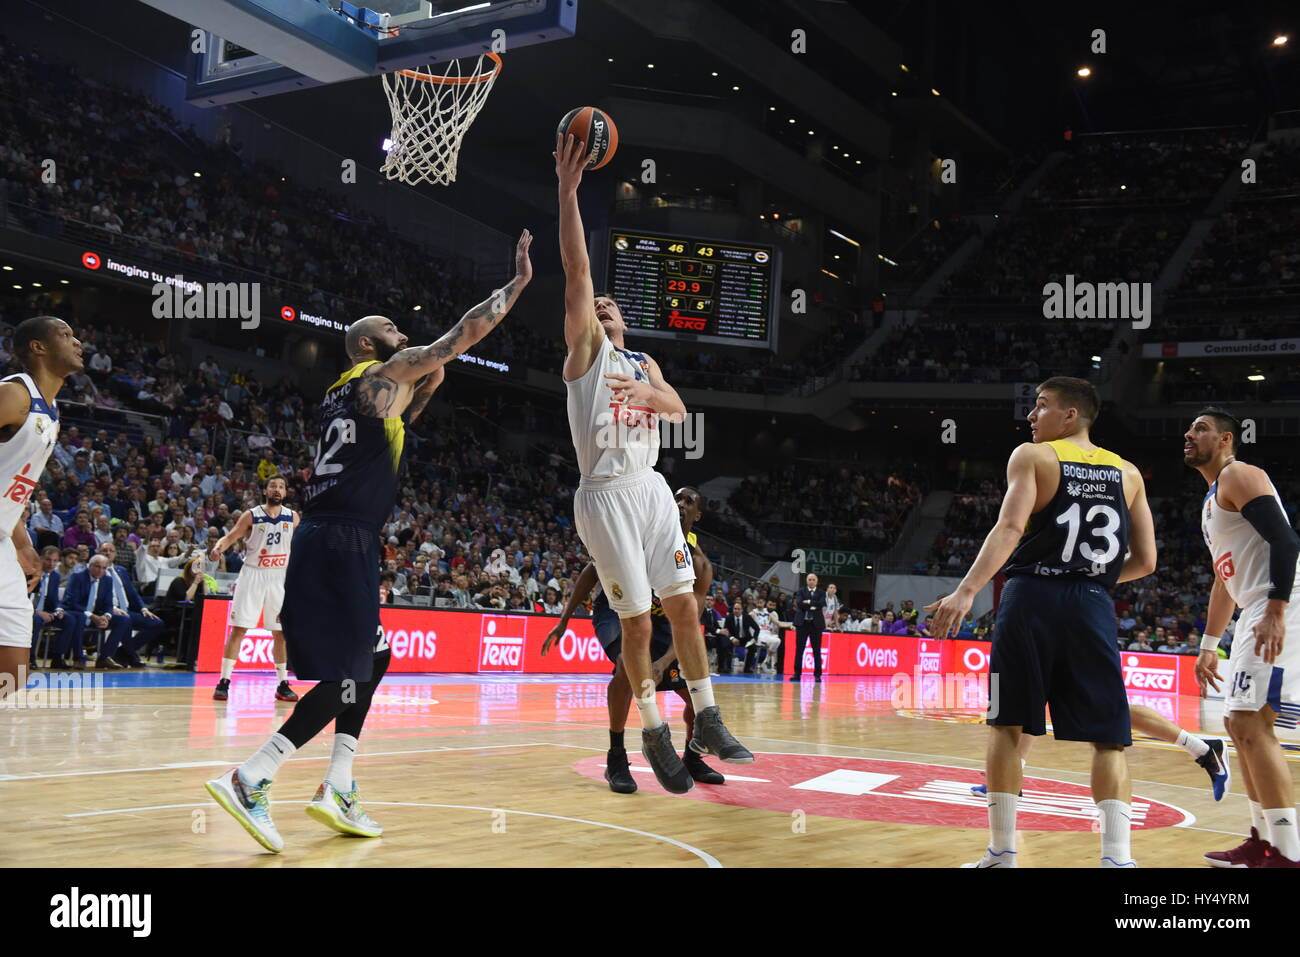 Madrid, Spain. 31st Mar, 2017. Jonas Maciulis (center) #8 of Real Madrid in action during the Euroleague basketball match between Real Madrid and Fenerbahce Istanbul at WiZink center in Madrid. Credit: Jorge Sanz/Pacific Press/Alamy Live News Stock Photo